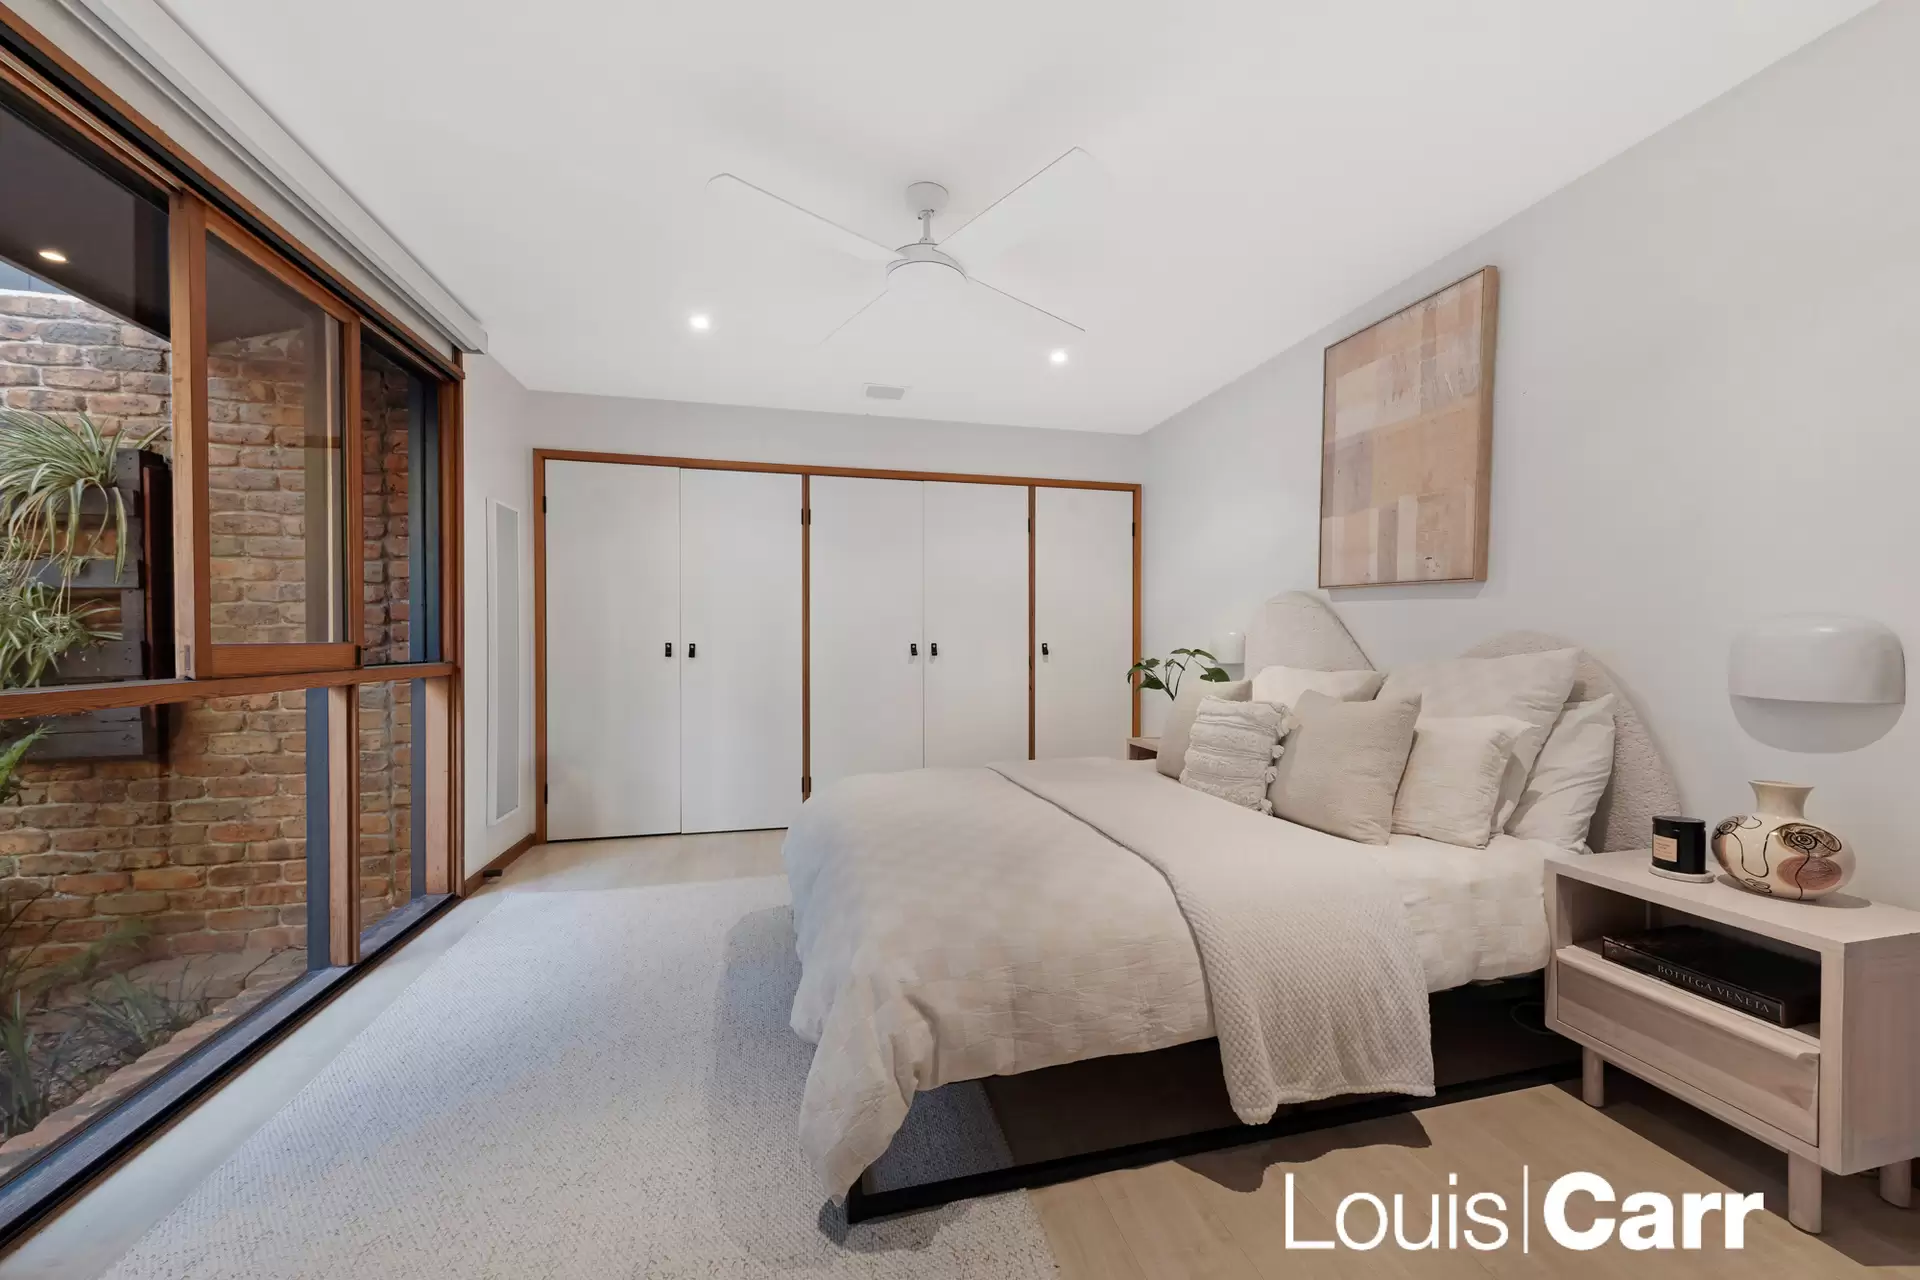 Photo #8: 11 Araluen Place, Glenhaven - Sold by Louis Carr Real Estate